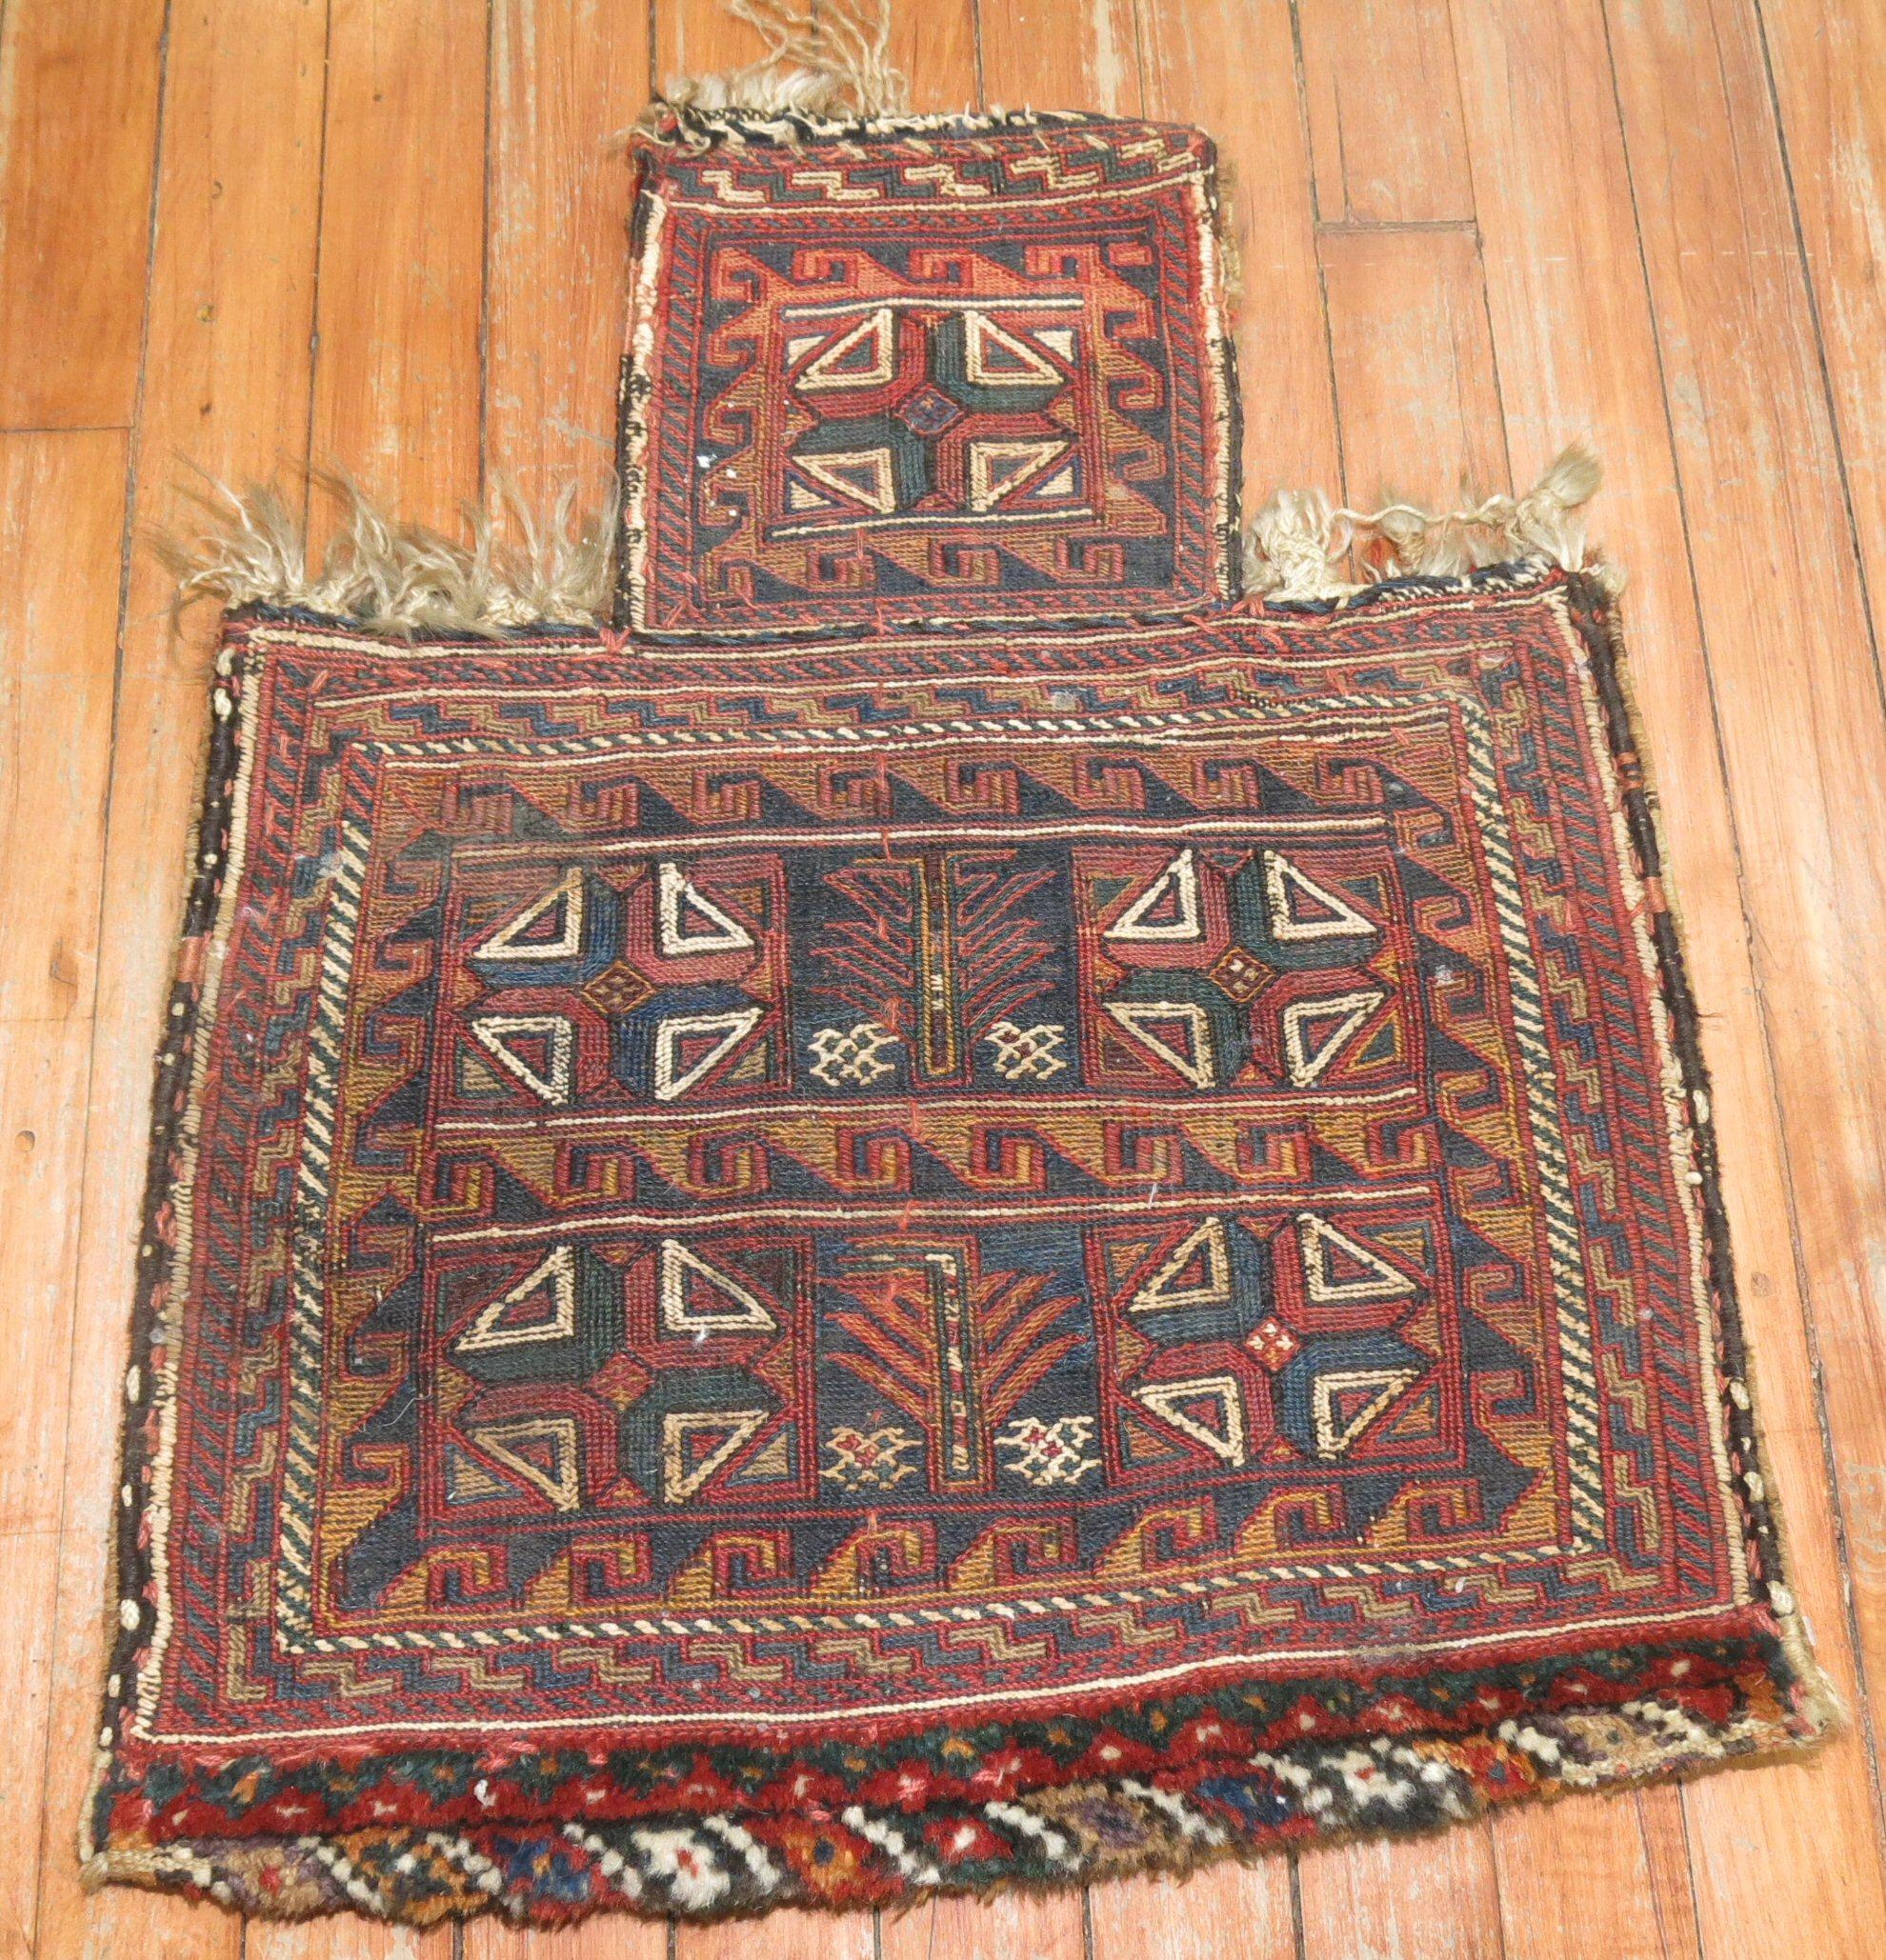 A Persian flat-weave salt bag textile rug from the early 20th century with rustic tones

Measures: 8' x 18'' x 22''.